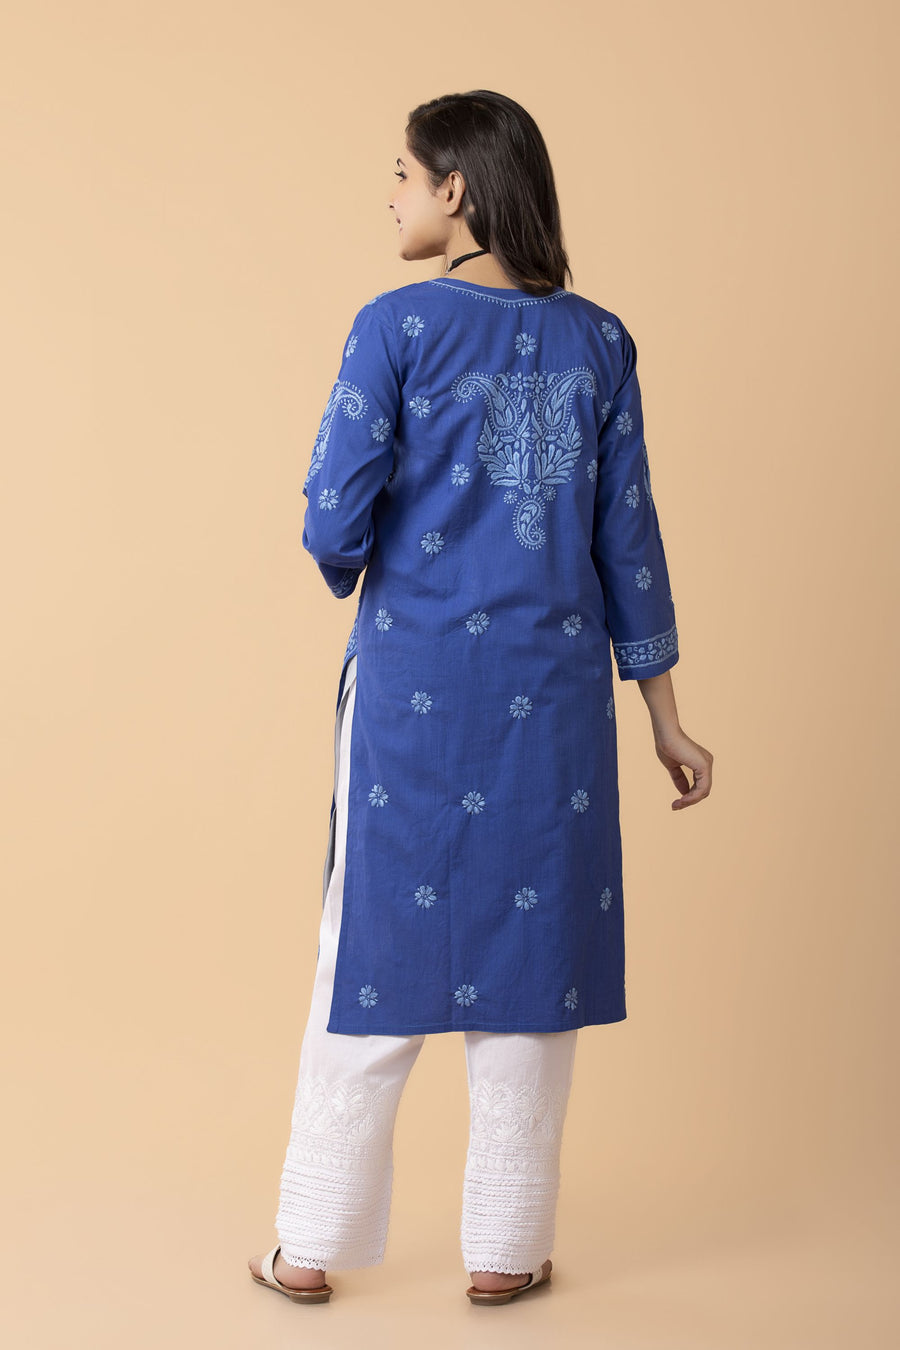 Lucknow Chikan Emporium Hand embroided Cotton  skin freindly Long Blue  Kurti.